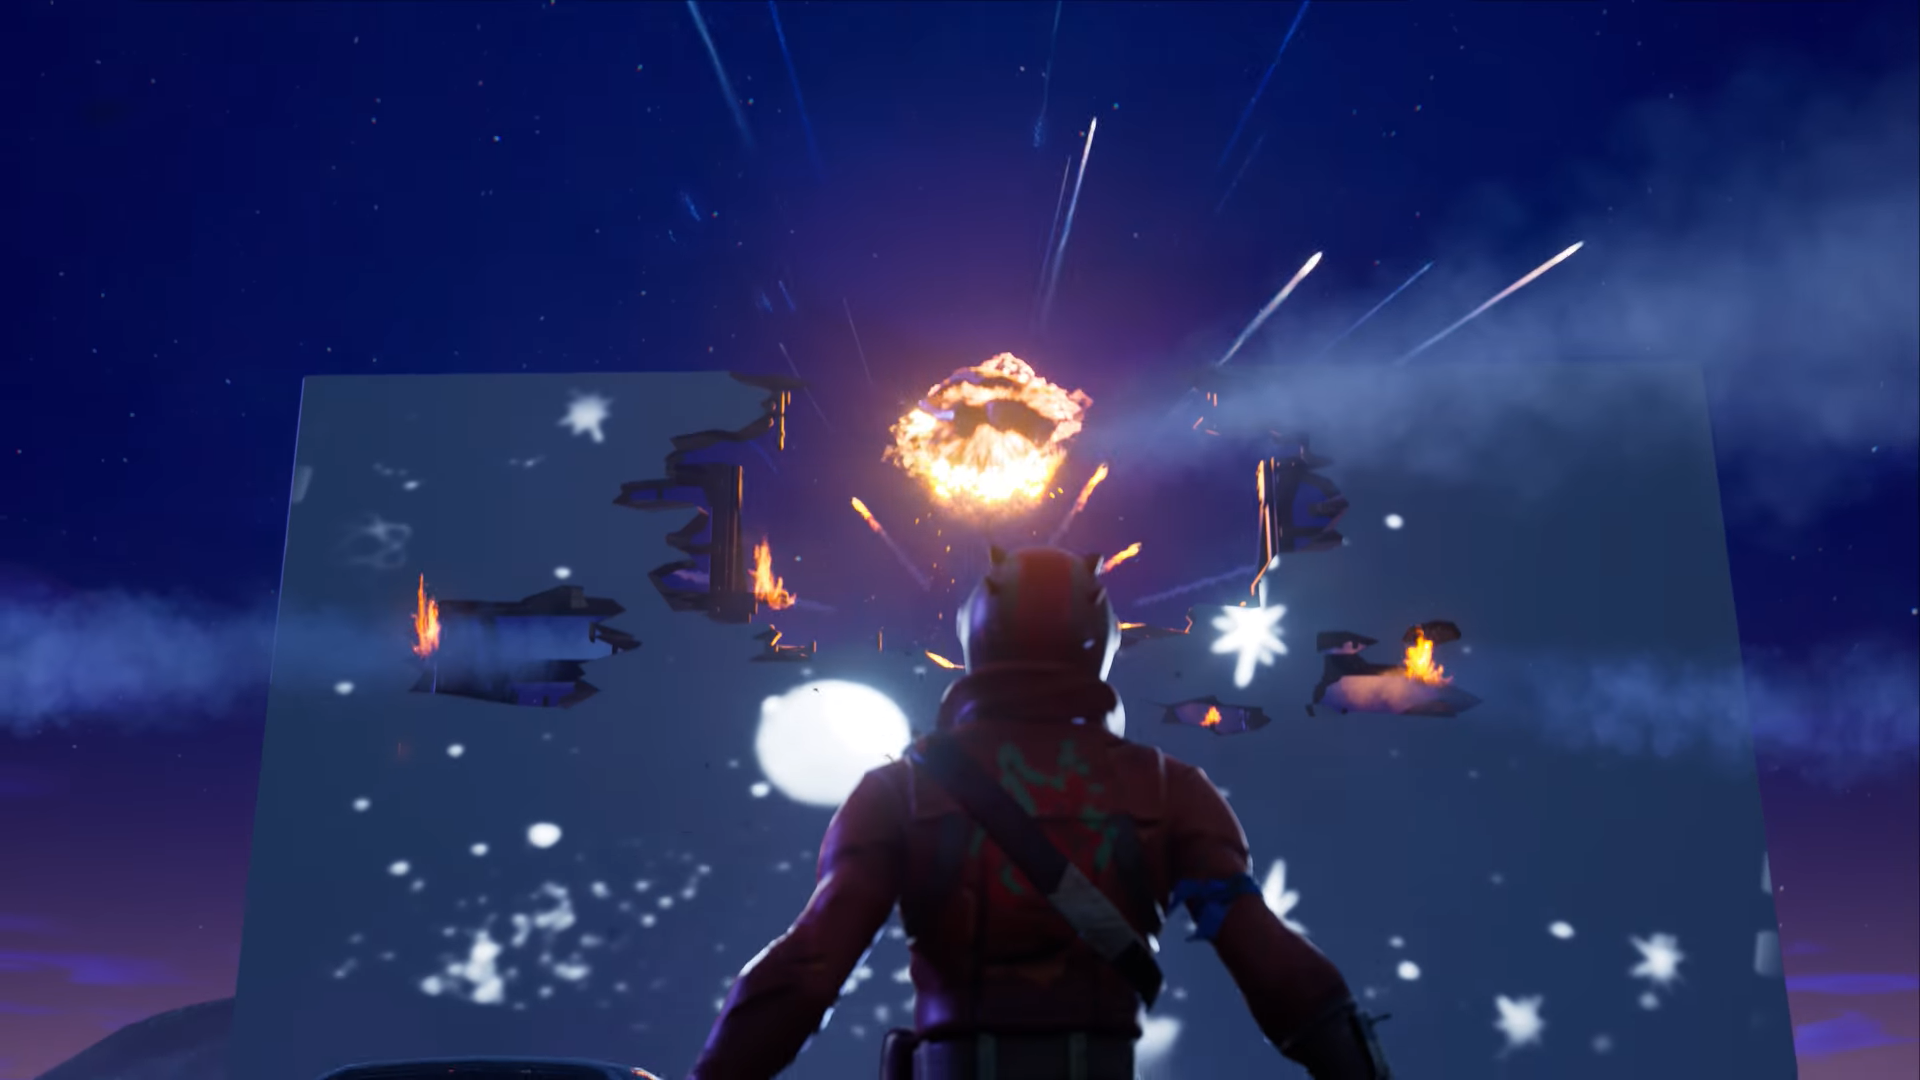 Mysterious Countdown Appears To!    Tease Missile Launch On Fortnite S - fortnite season 4 challenges